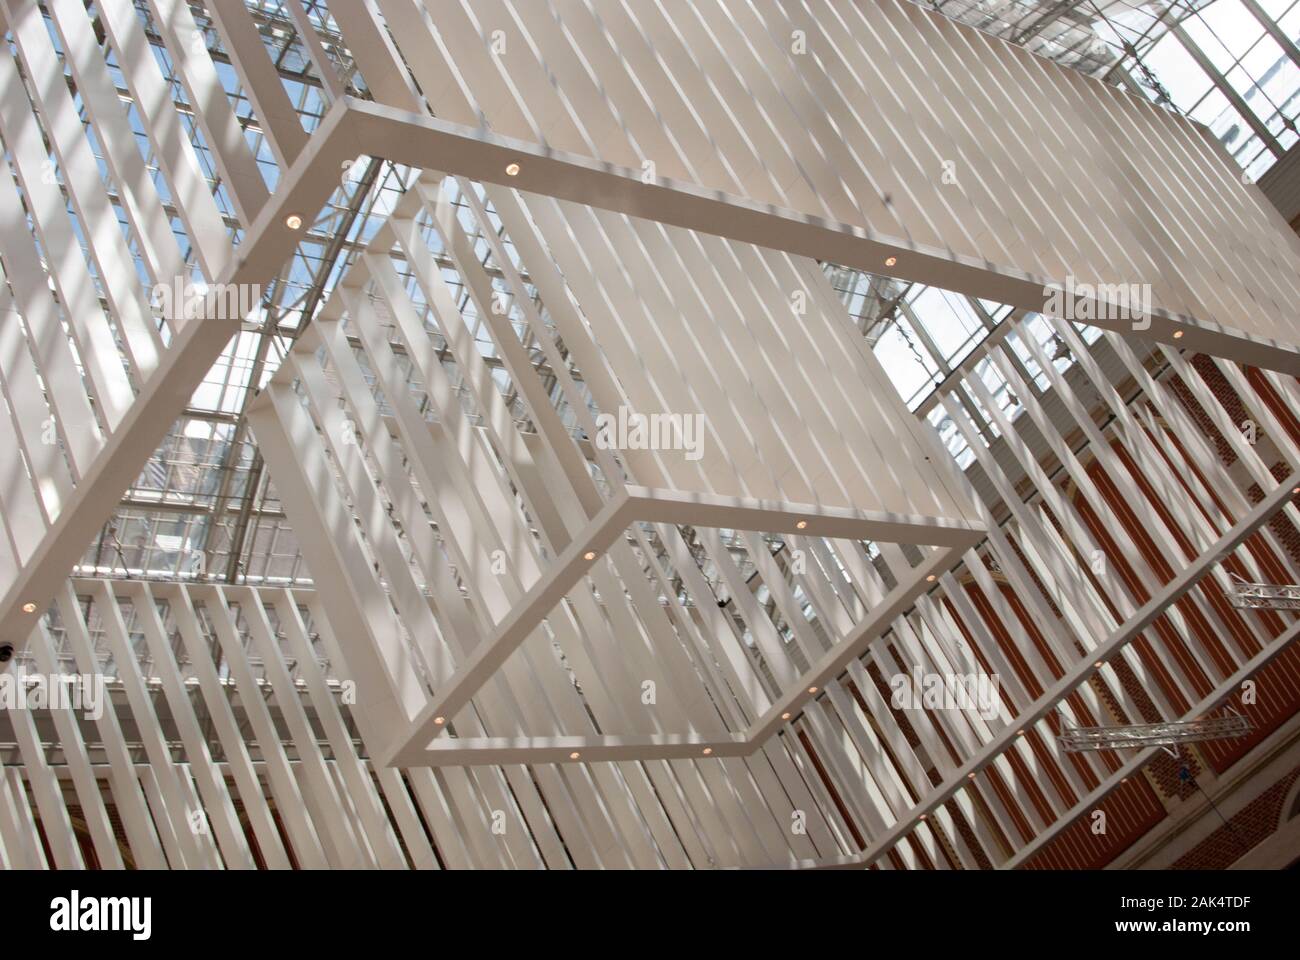 Grids hanging from the seeling Stock Photo